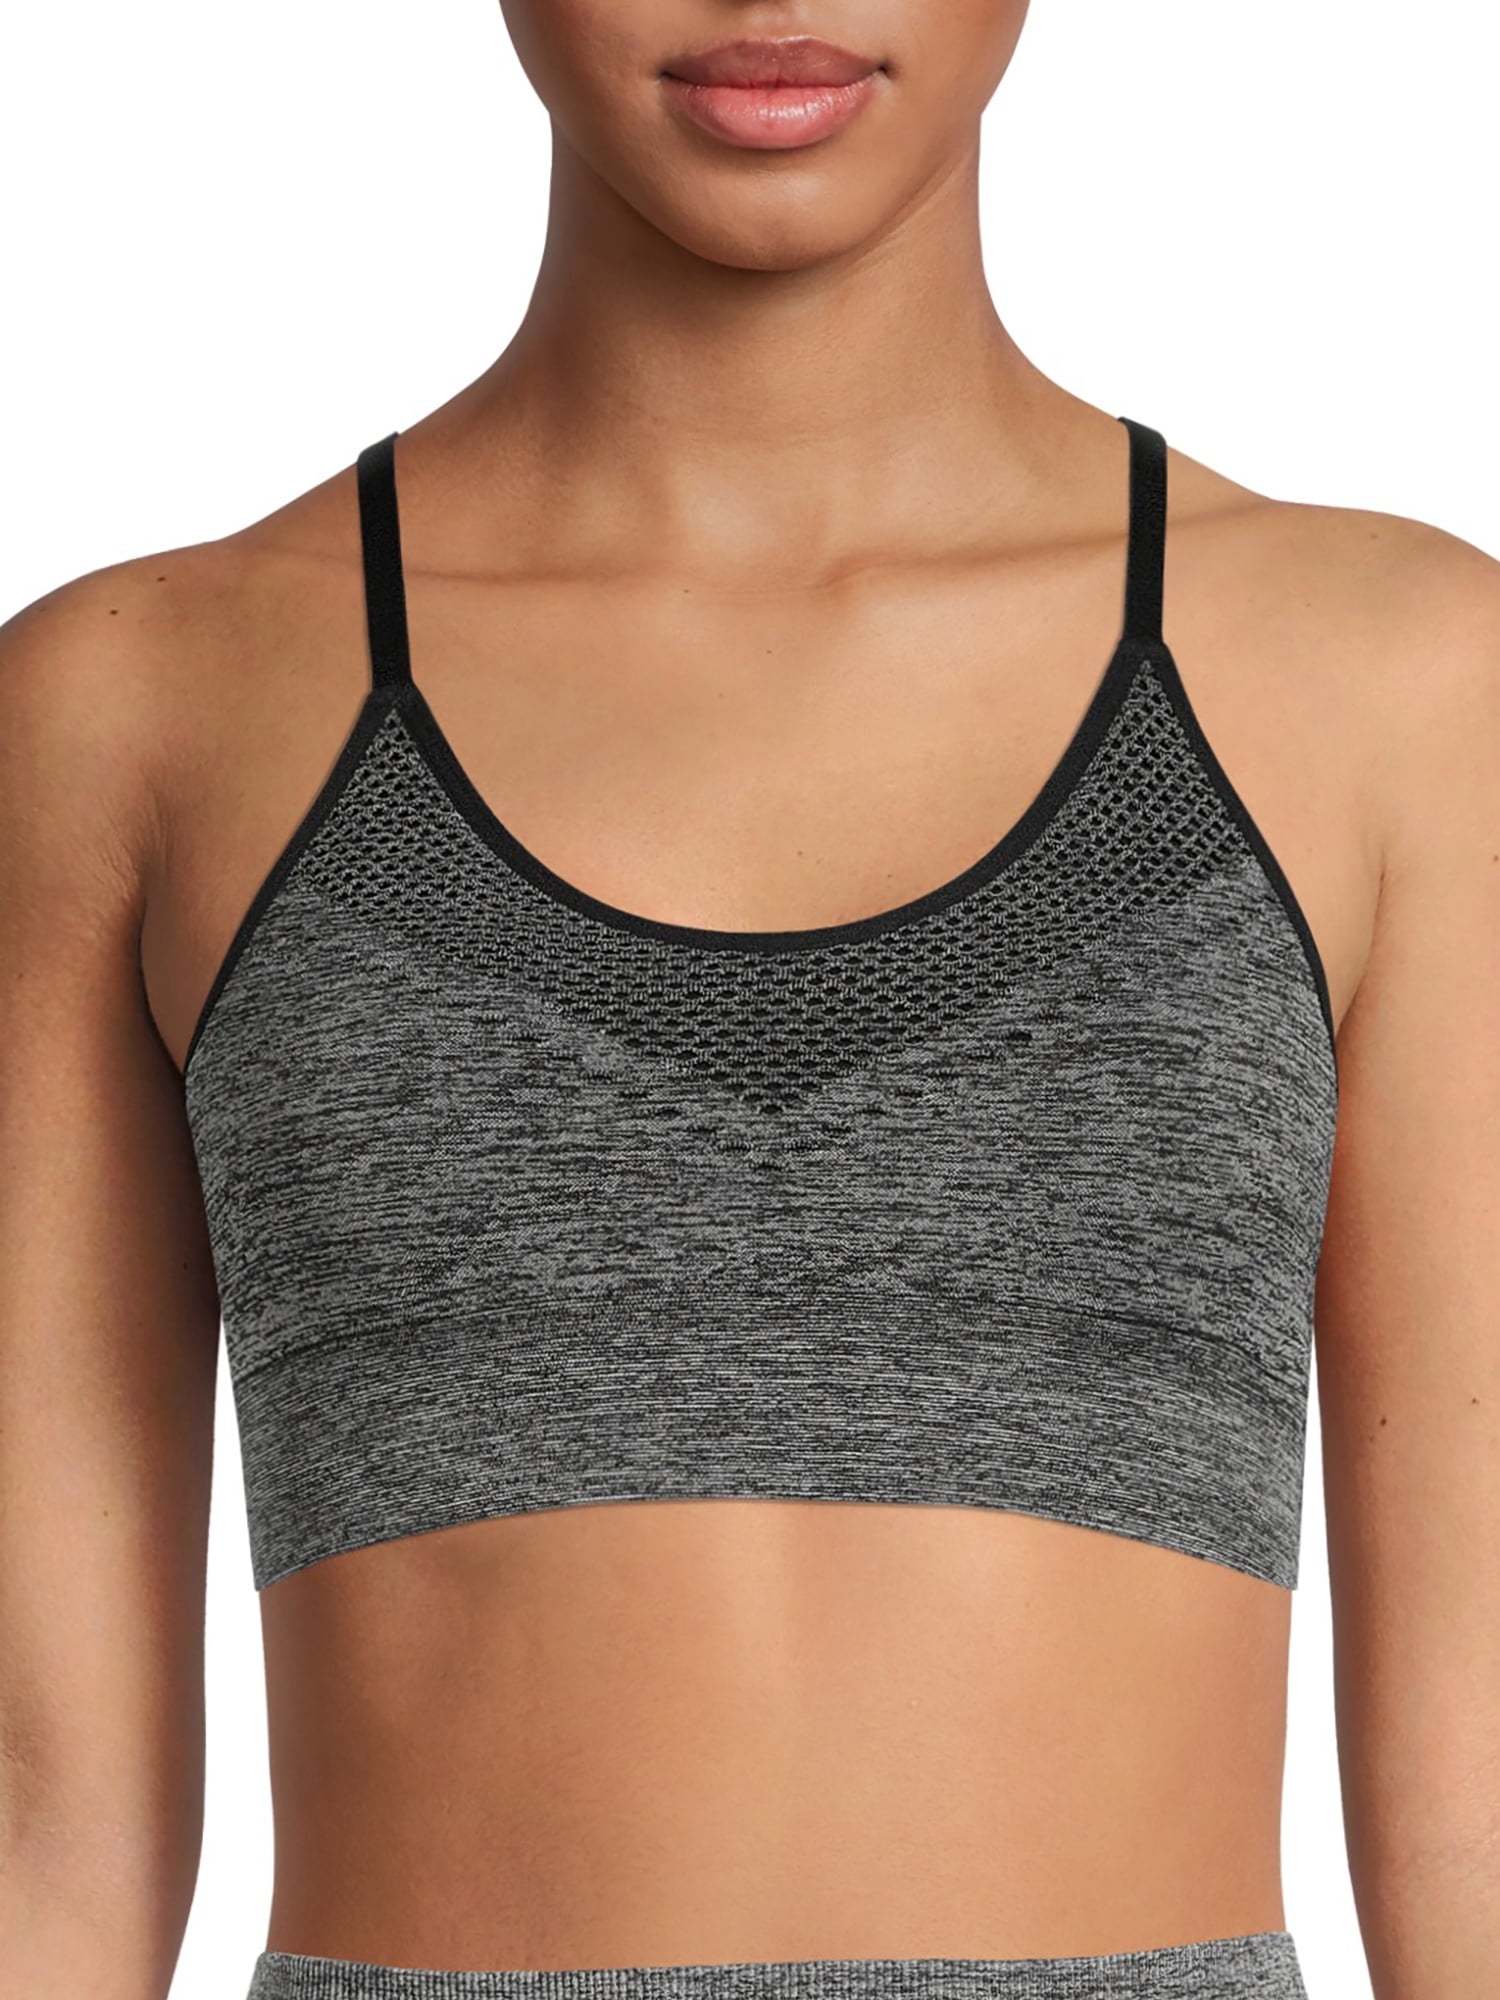 Buy Avia Low Support Trainer Crop Sports Bra at Ubuy UK